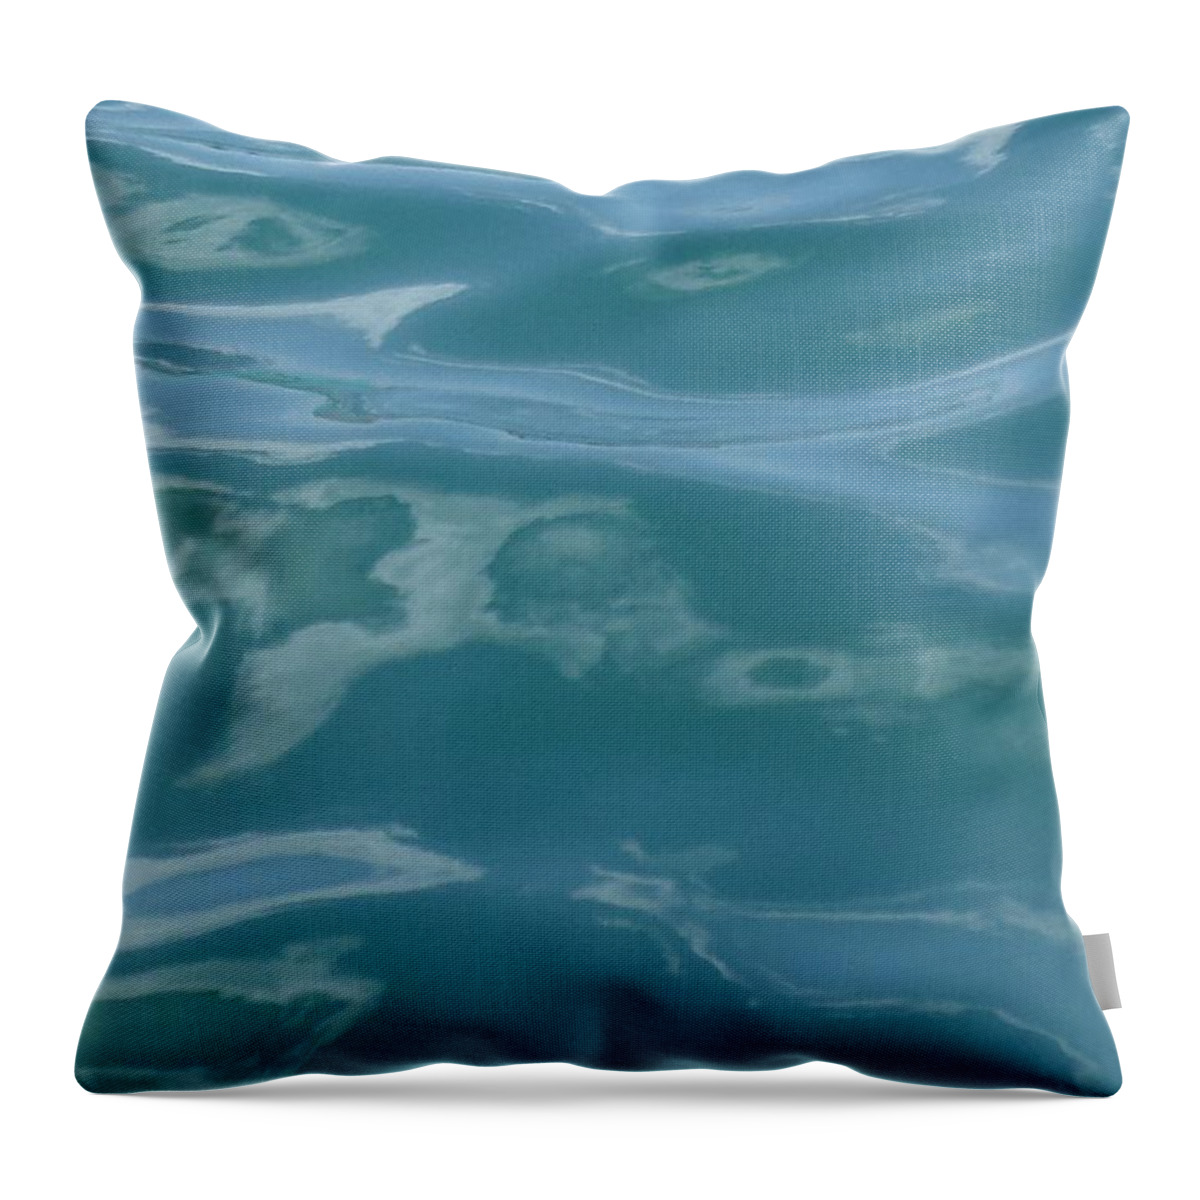 Multi Panel Throw Pillow featuring the photograph Colored Wave Natural Panel Three by Stephen Jorgensen